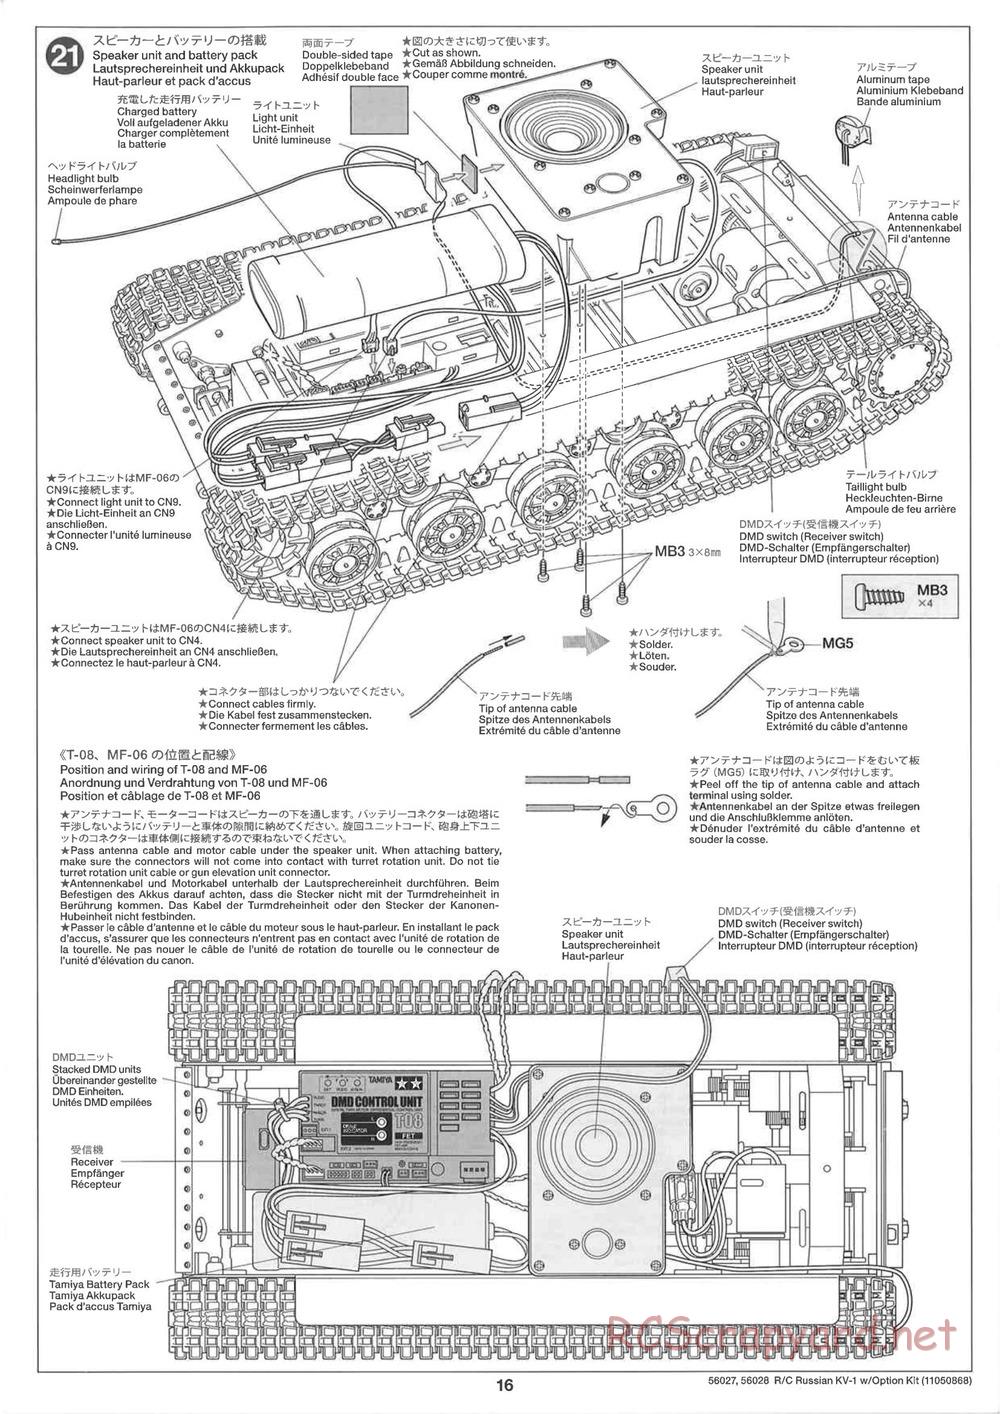 Tamiya - Russian Heavy Tank KV-1 - 1/16 Scale Chassis - Manual - Page 16